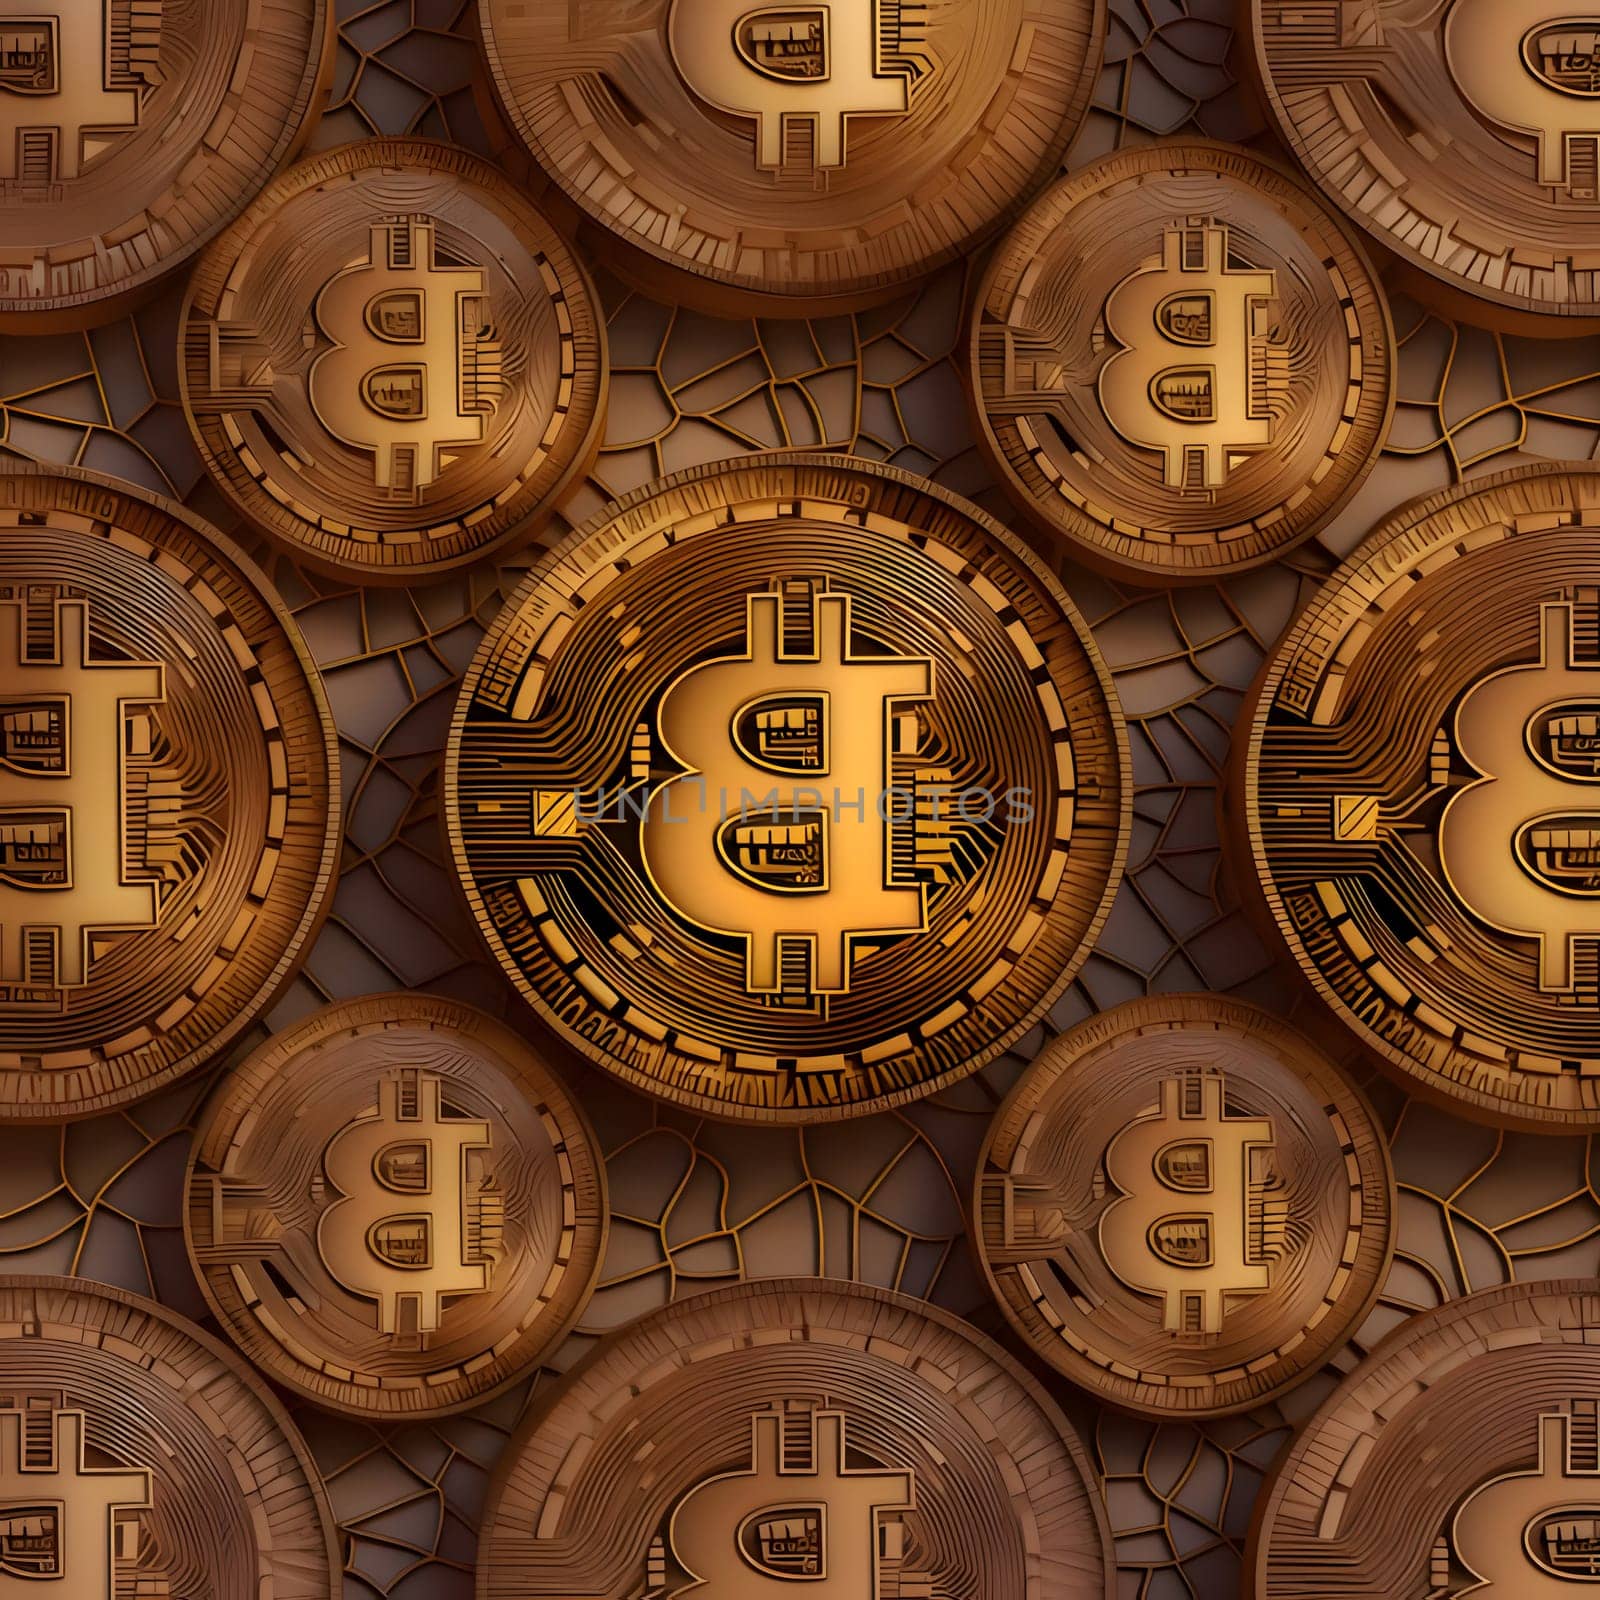 Patterns and banners backgrounds: Bitcoin. Cryptocurrency. Golden coins with bitcoin symbol on cracked background. 3D rendering